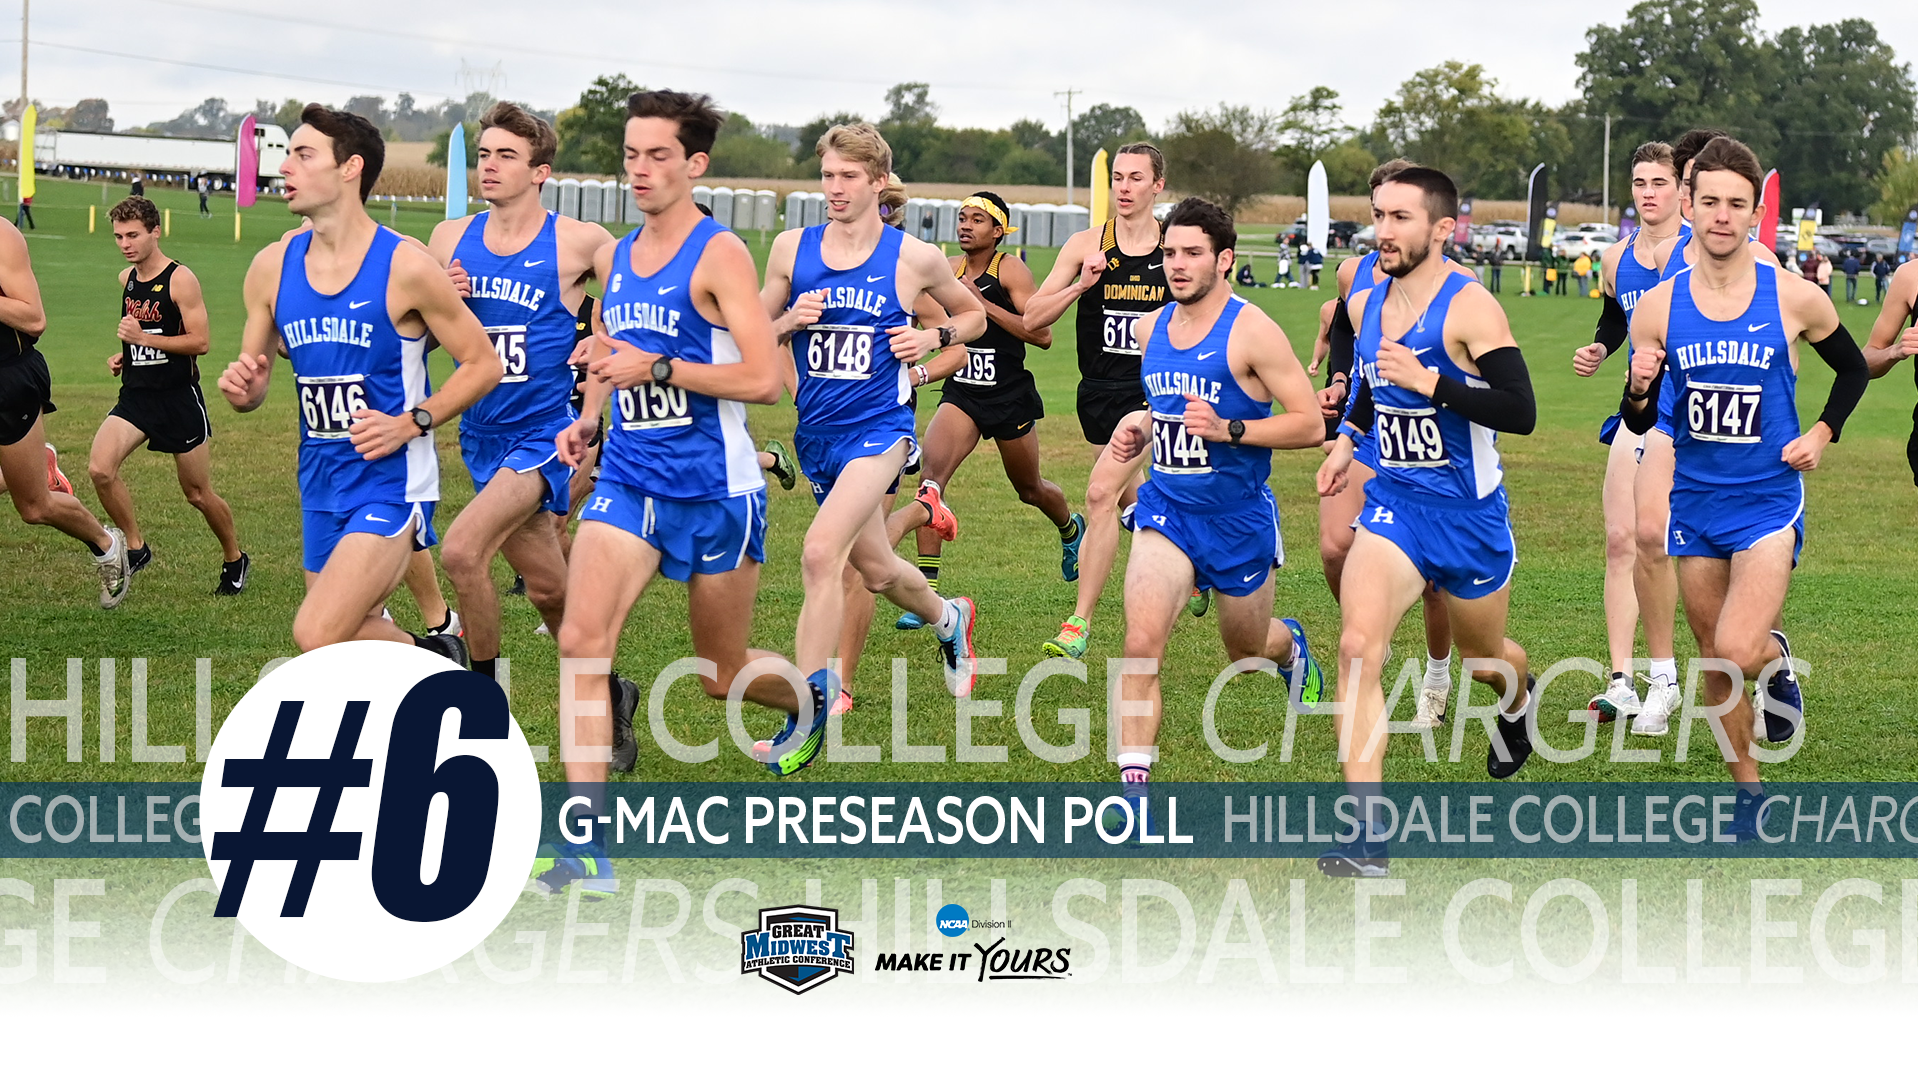 Charger men’s cross country team picked to finish sixth in G-MAC Preseason Coaches Poll